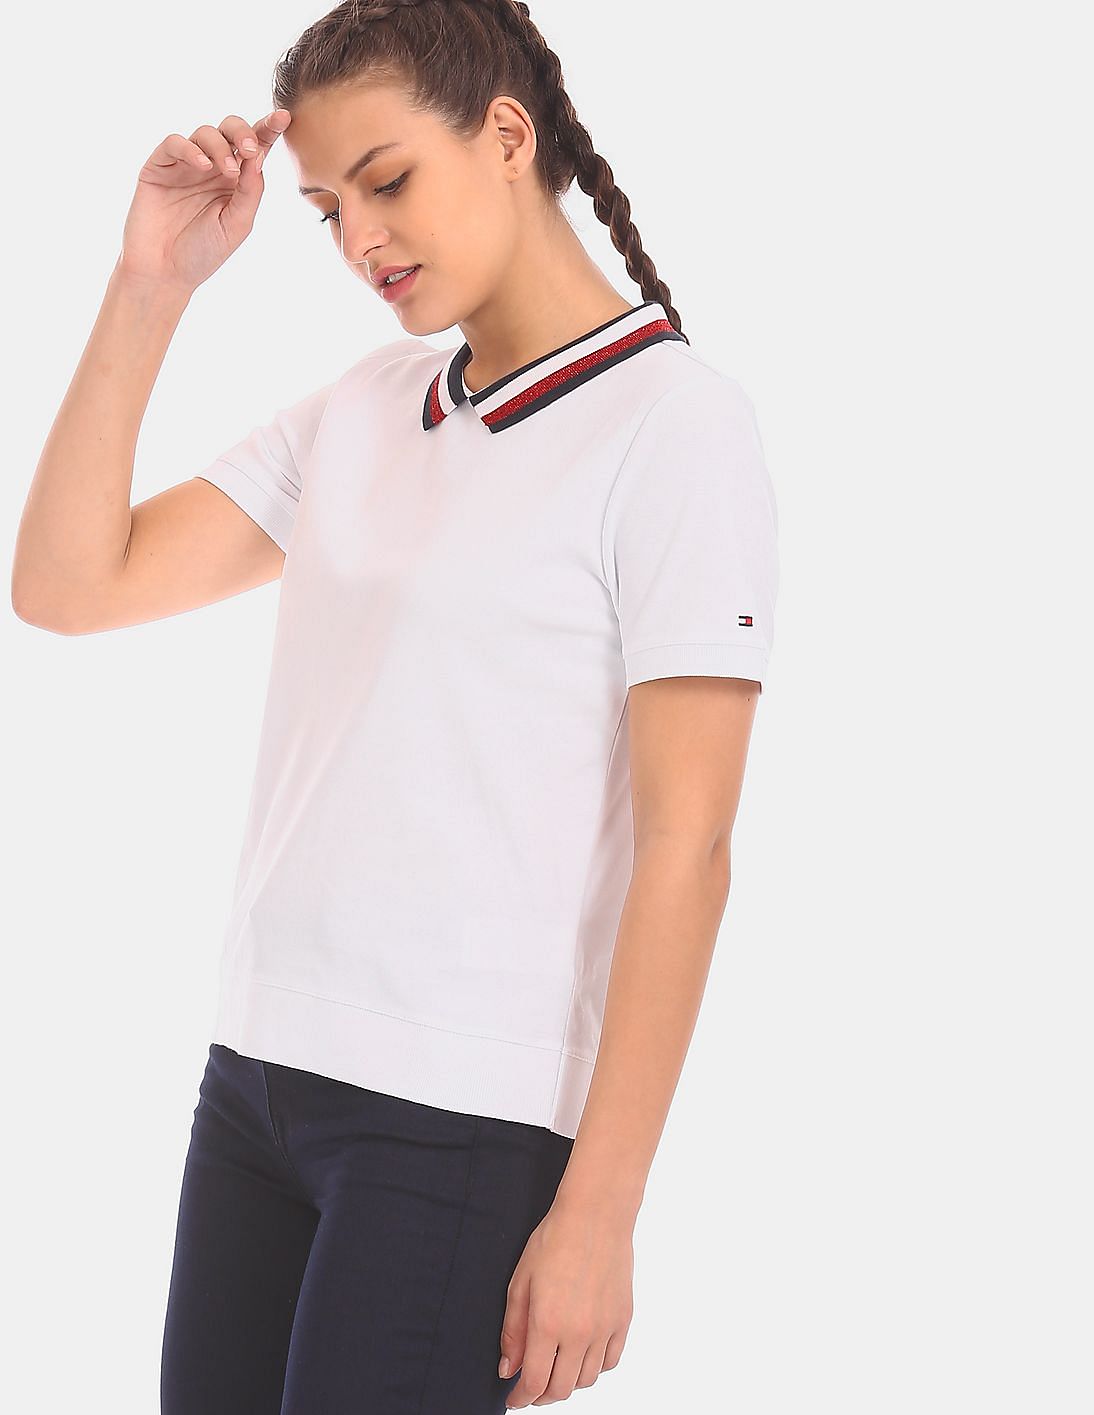 Buy Tommy Hilfiger Women Women White Striped Collar Solid Polo Shirt ...